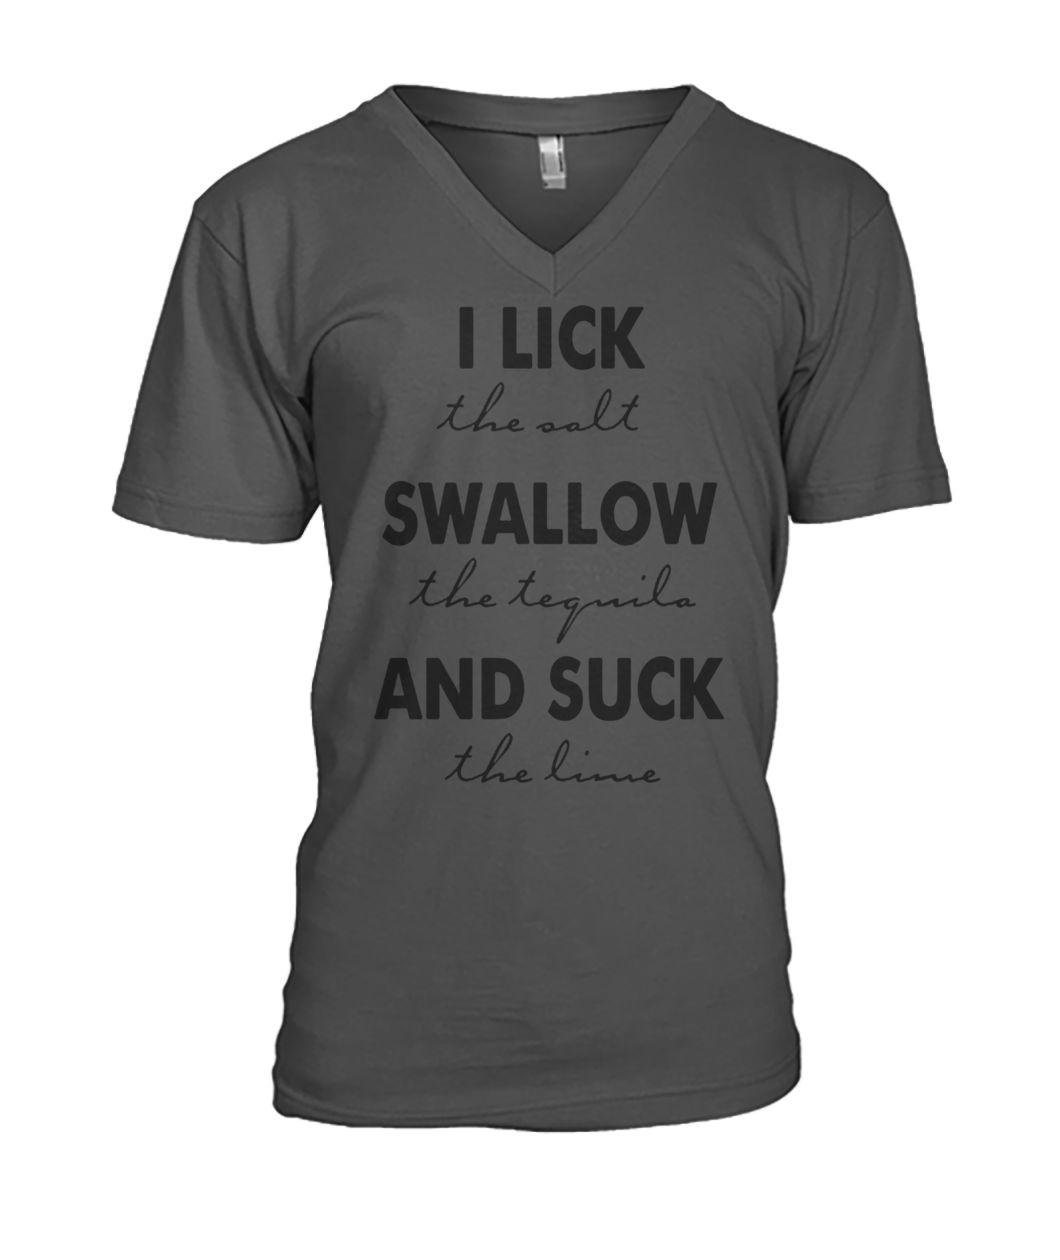 I lick the salt swallow the tequila and suck the lime mens v-neck